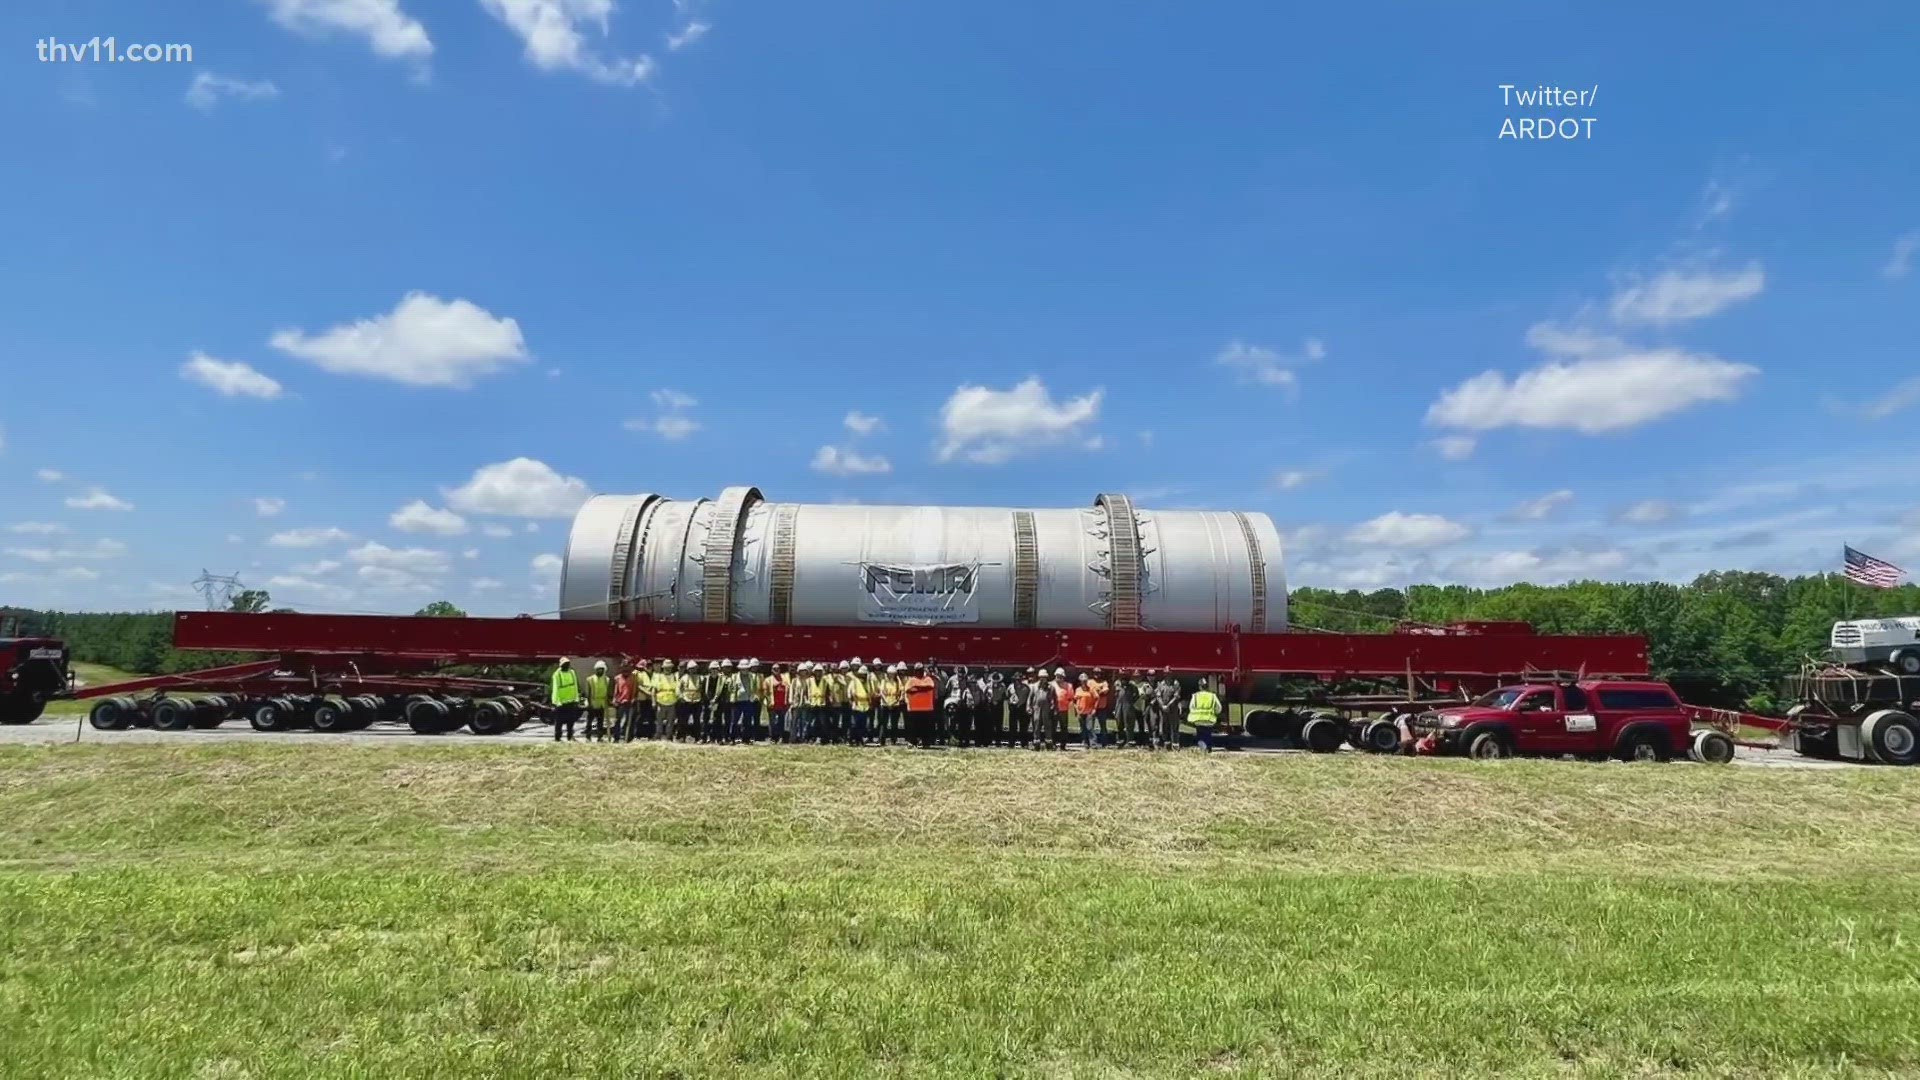 A 300-ton kiln furnace from Italy has reached its final destination in Gum Springs after a 6-day journey across south Arkansas highways.